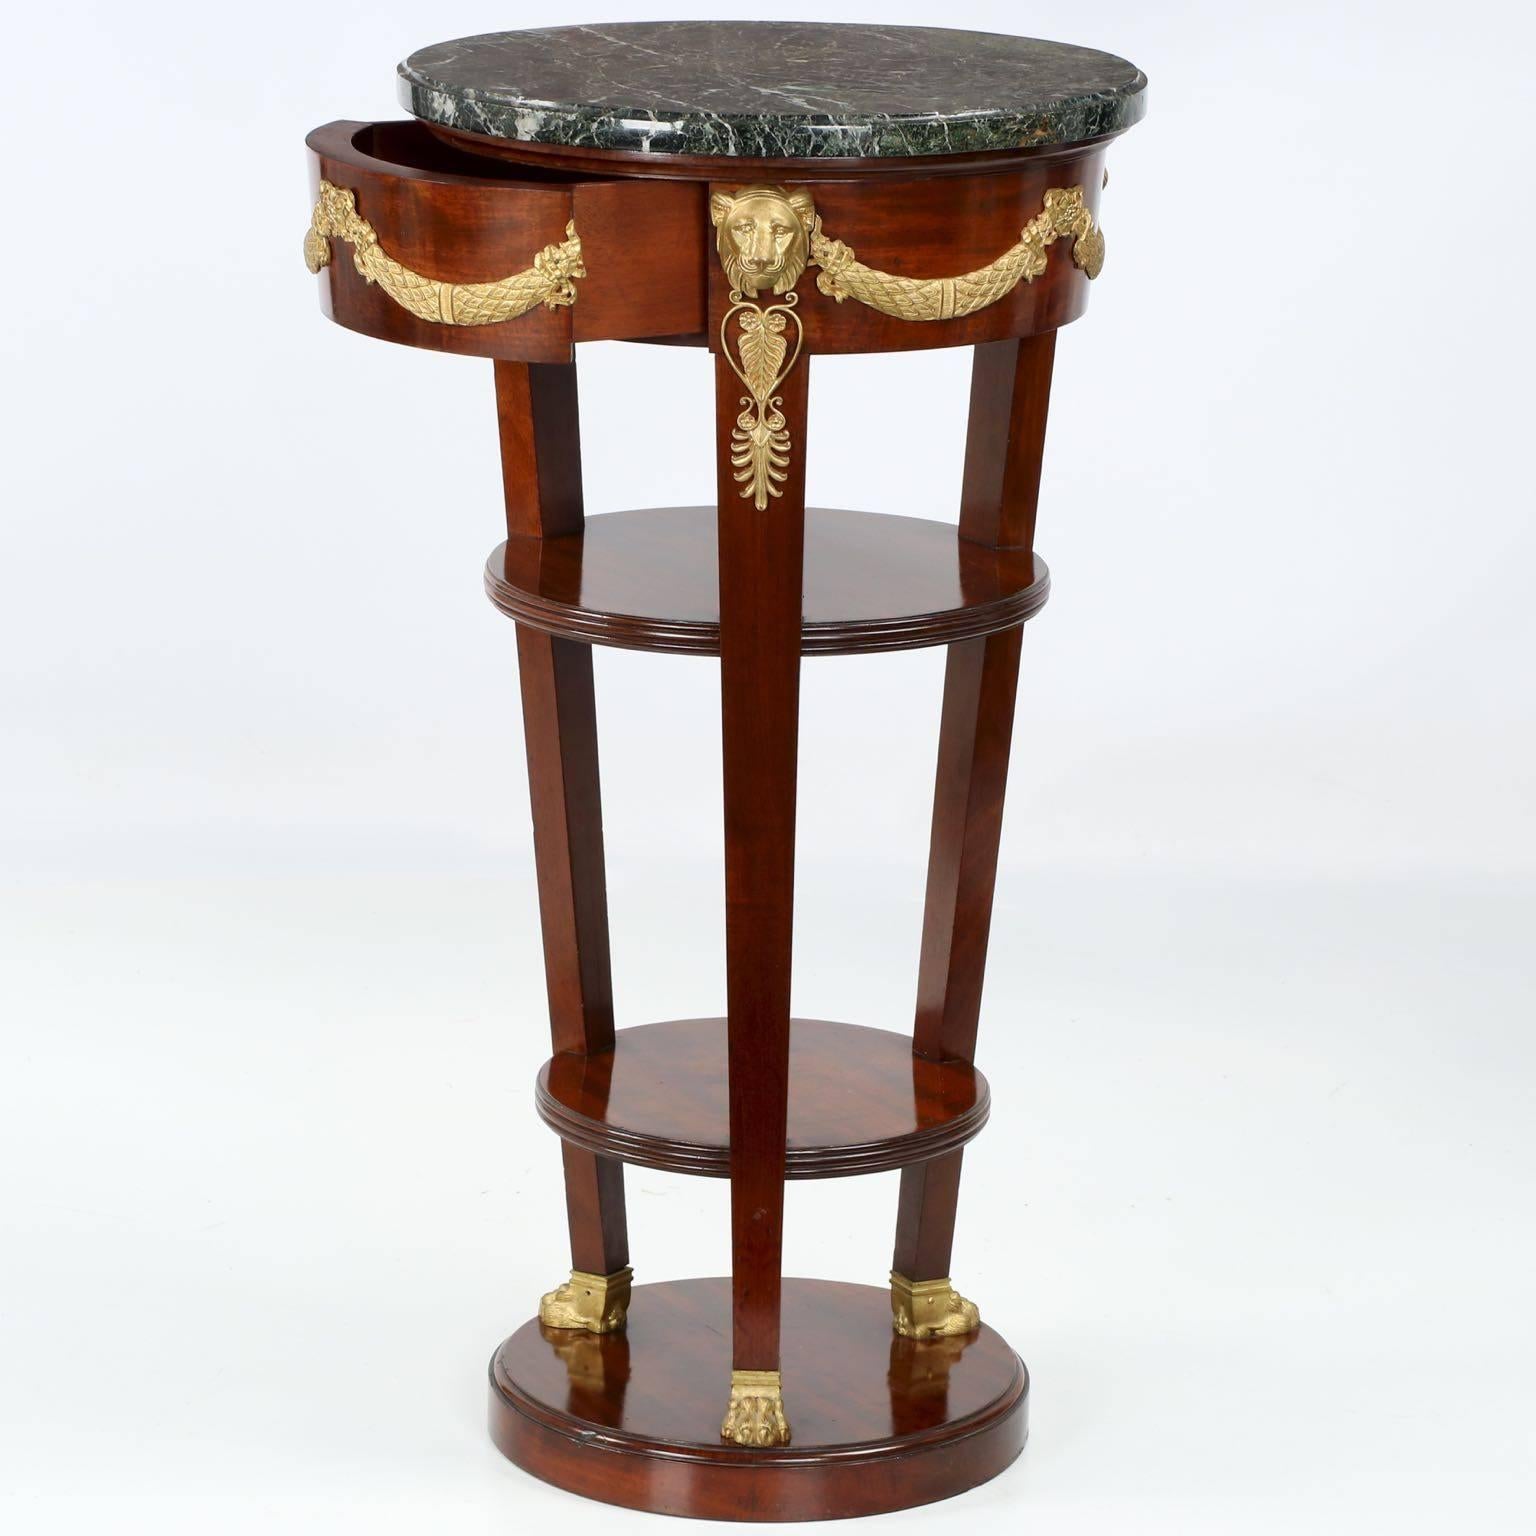 A precise and very finely crafted piece from the turn of the century, this Stand borrows directly from the neoclassical motifs of the first quarter of the 19th century. Each leg is surmounted by highly detailed lion masks flanked by floral swags